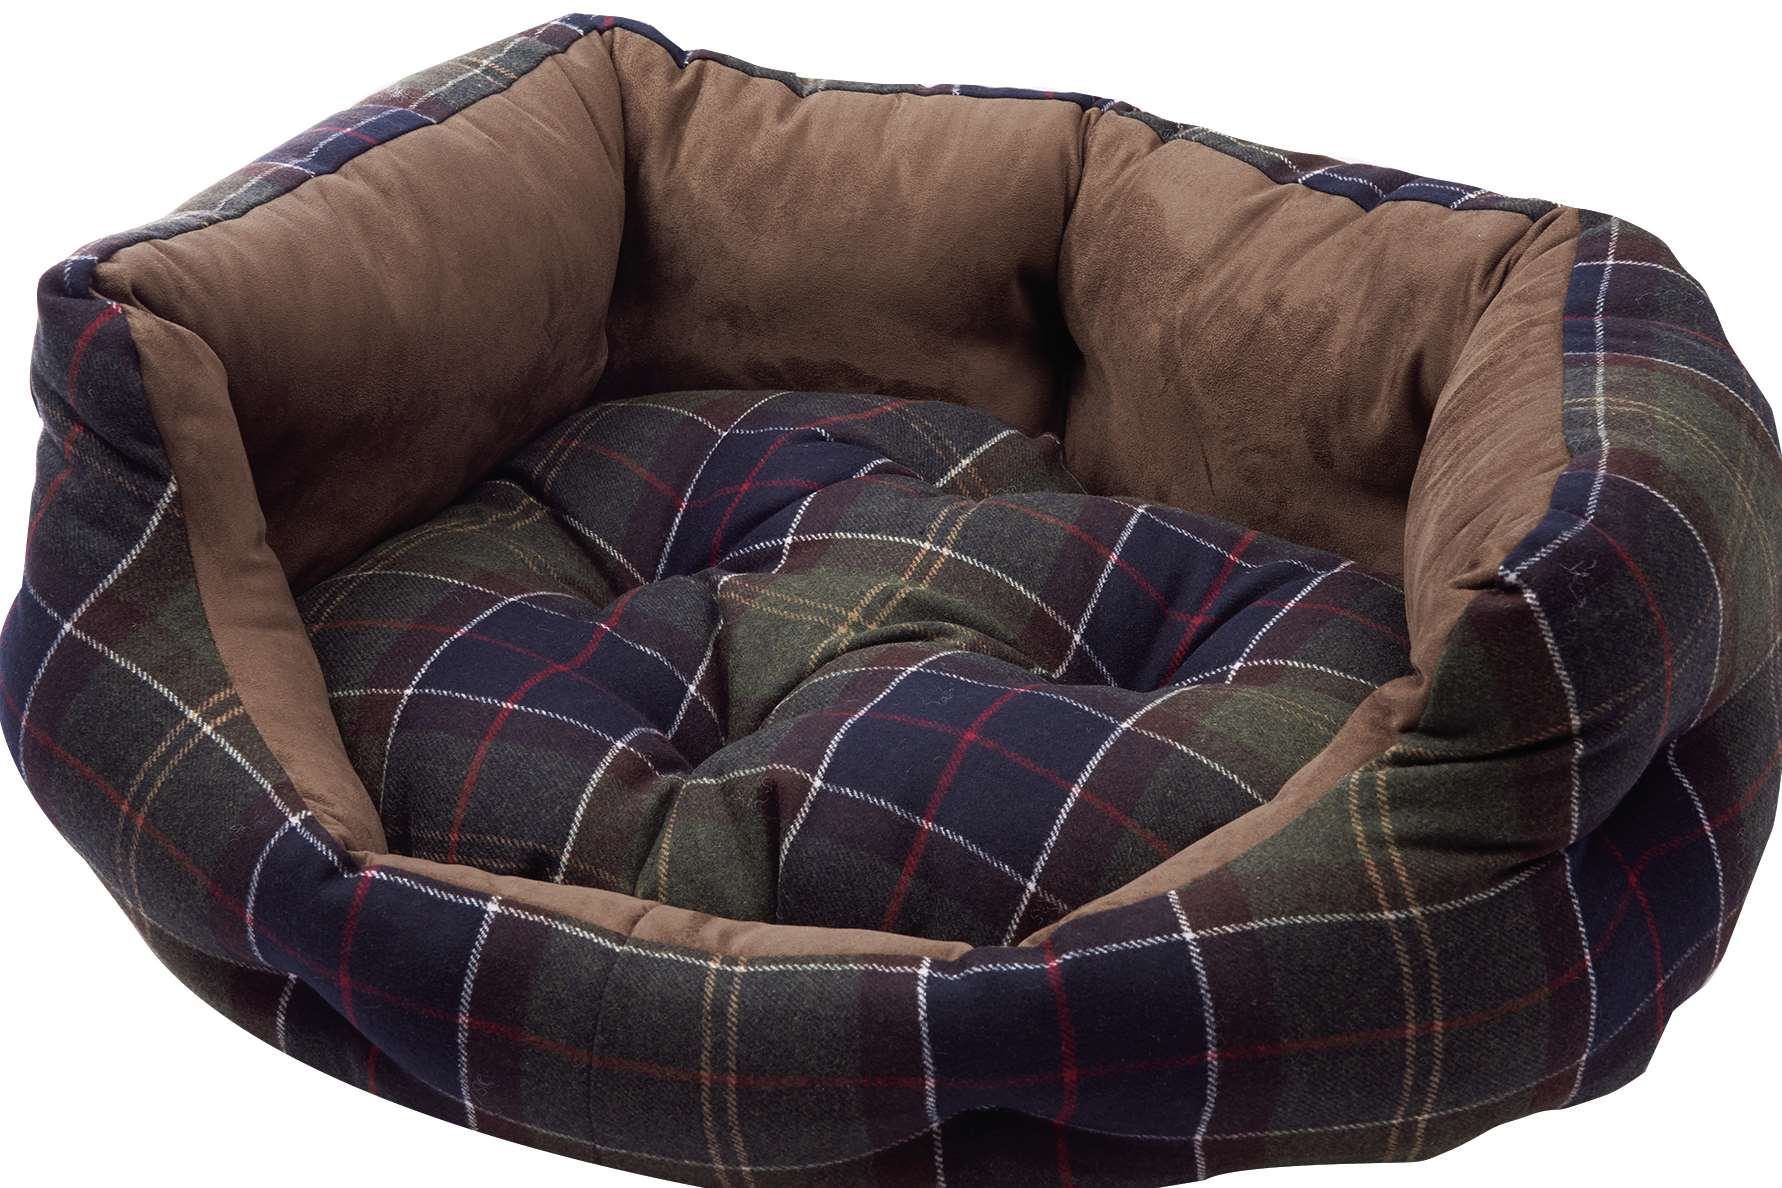 This Barbour dog basket is perfect for your pooch to snuggle up in while you open your Christmas presents